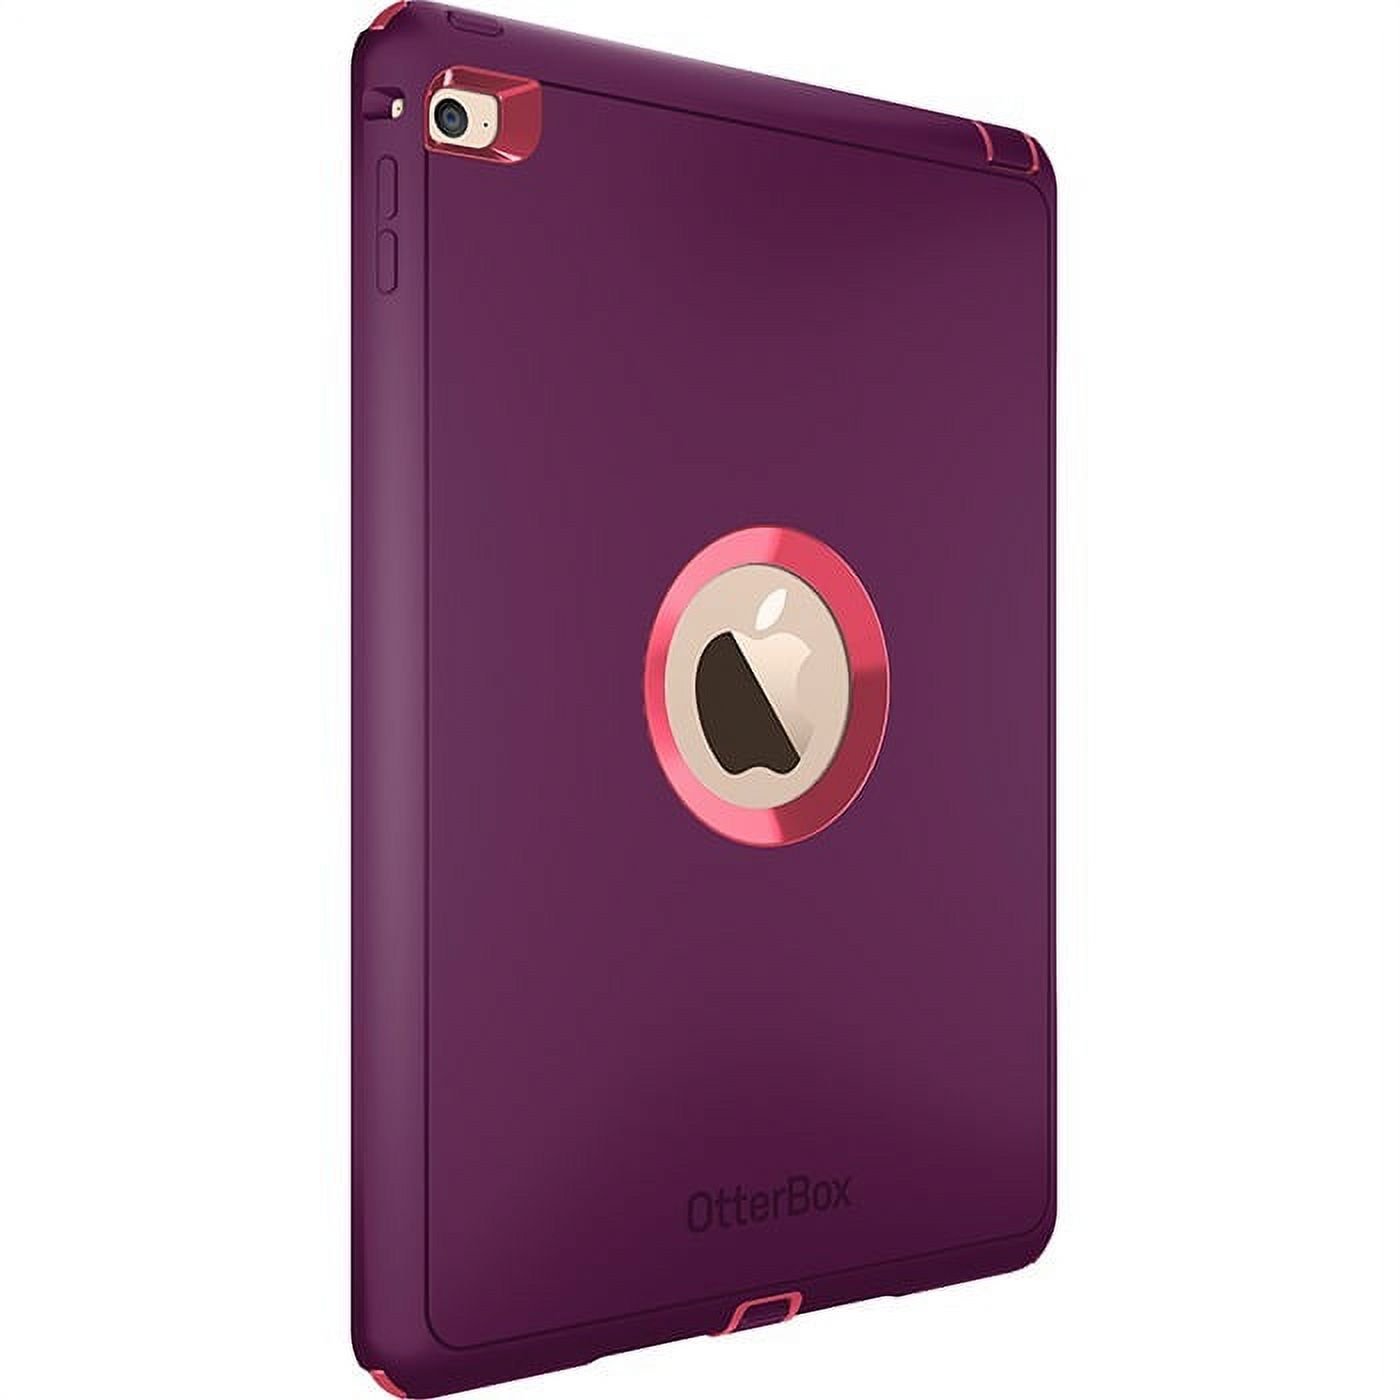 OtterBox Defender Series Case for iPad Air 2 - image 4 of 6